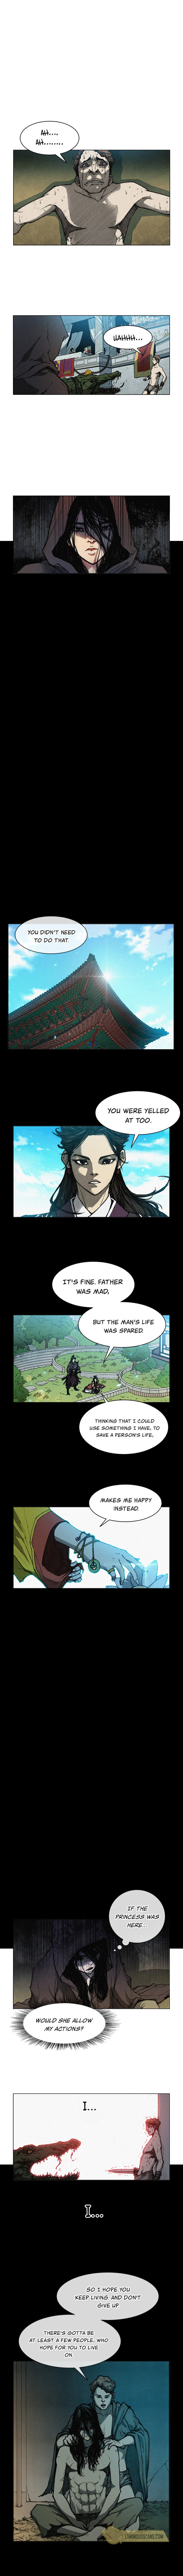 Long Way of the Warrior - Chapter 5 Page 10